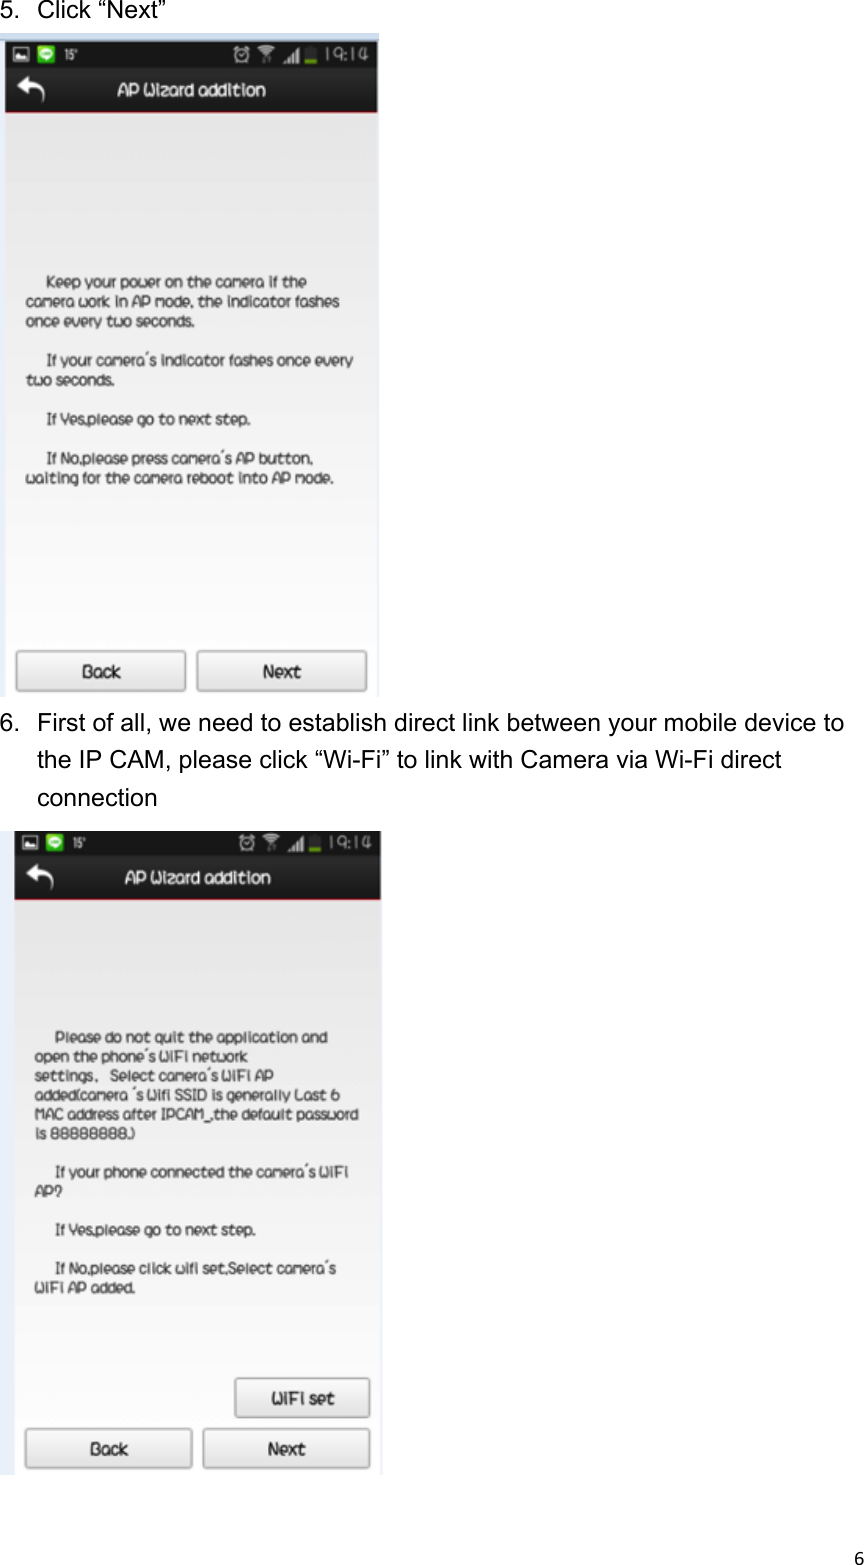 6&quot;&quot;5.  Click “Next”  6.  First of all, we need to establish direct link between your mobile device to the IP CAM, please click “Wi-Fi” to link with Camera via Wi-Fi direct connection   